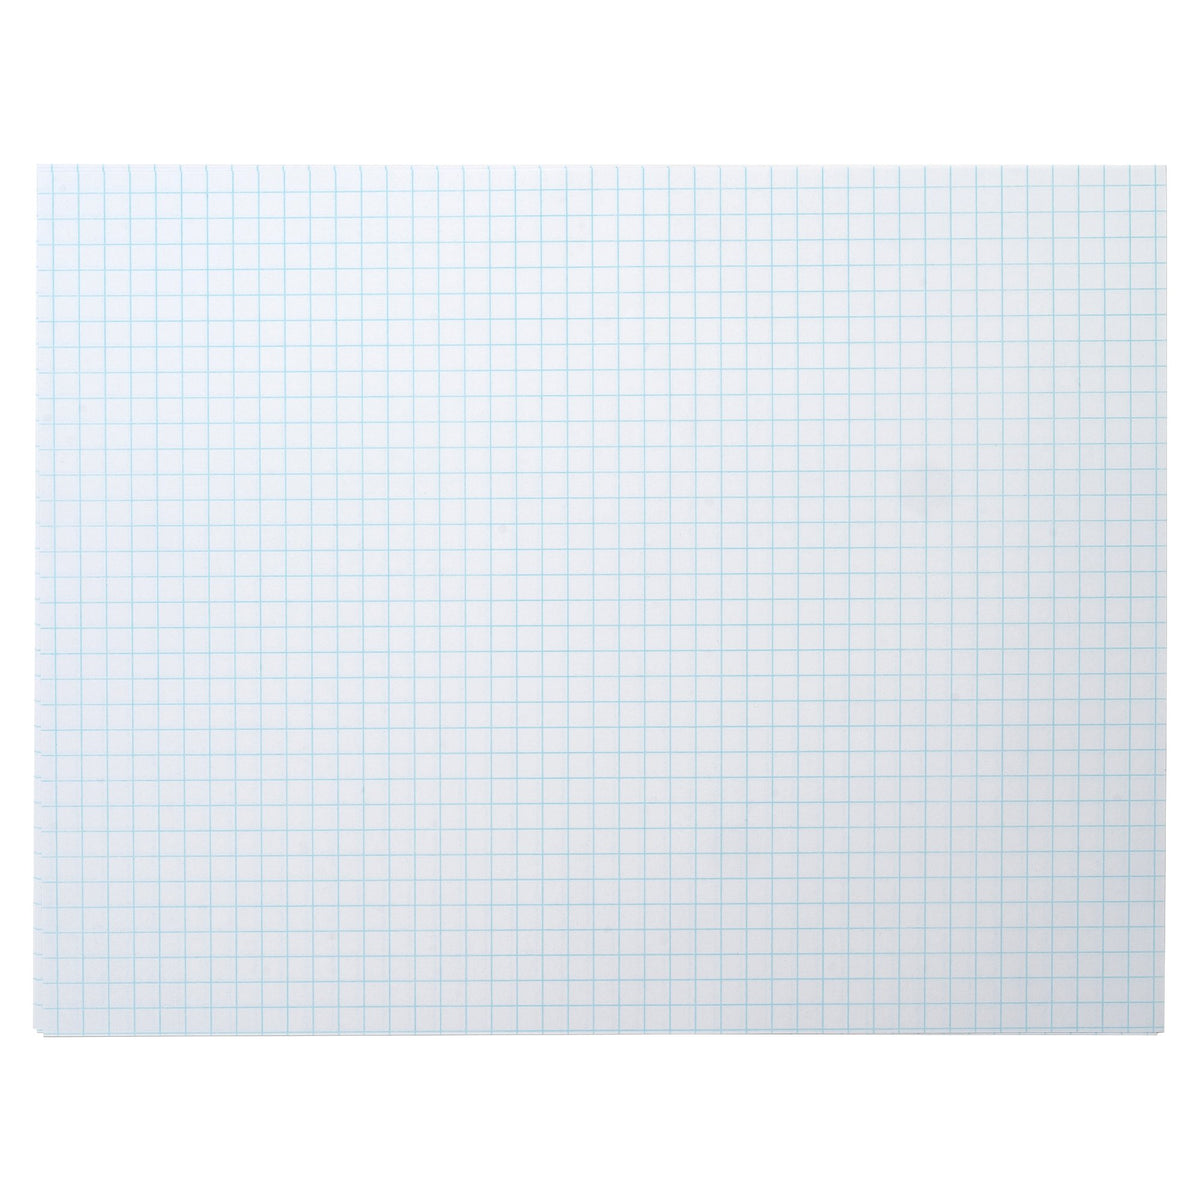 Pacific Arc, Quadrille Paper Pad, 50 Sheets 8.5 Inch x 11 Inch, 4 x 4 Grid